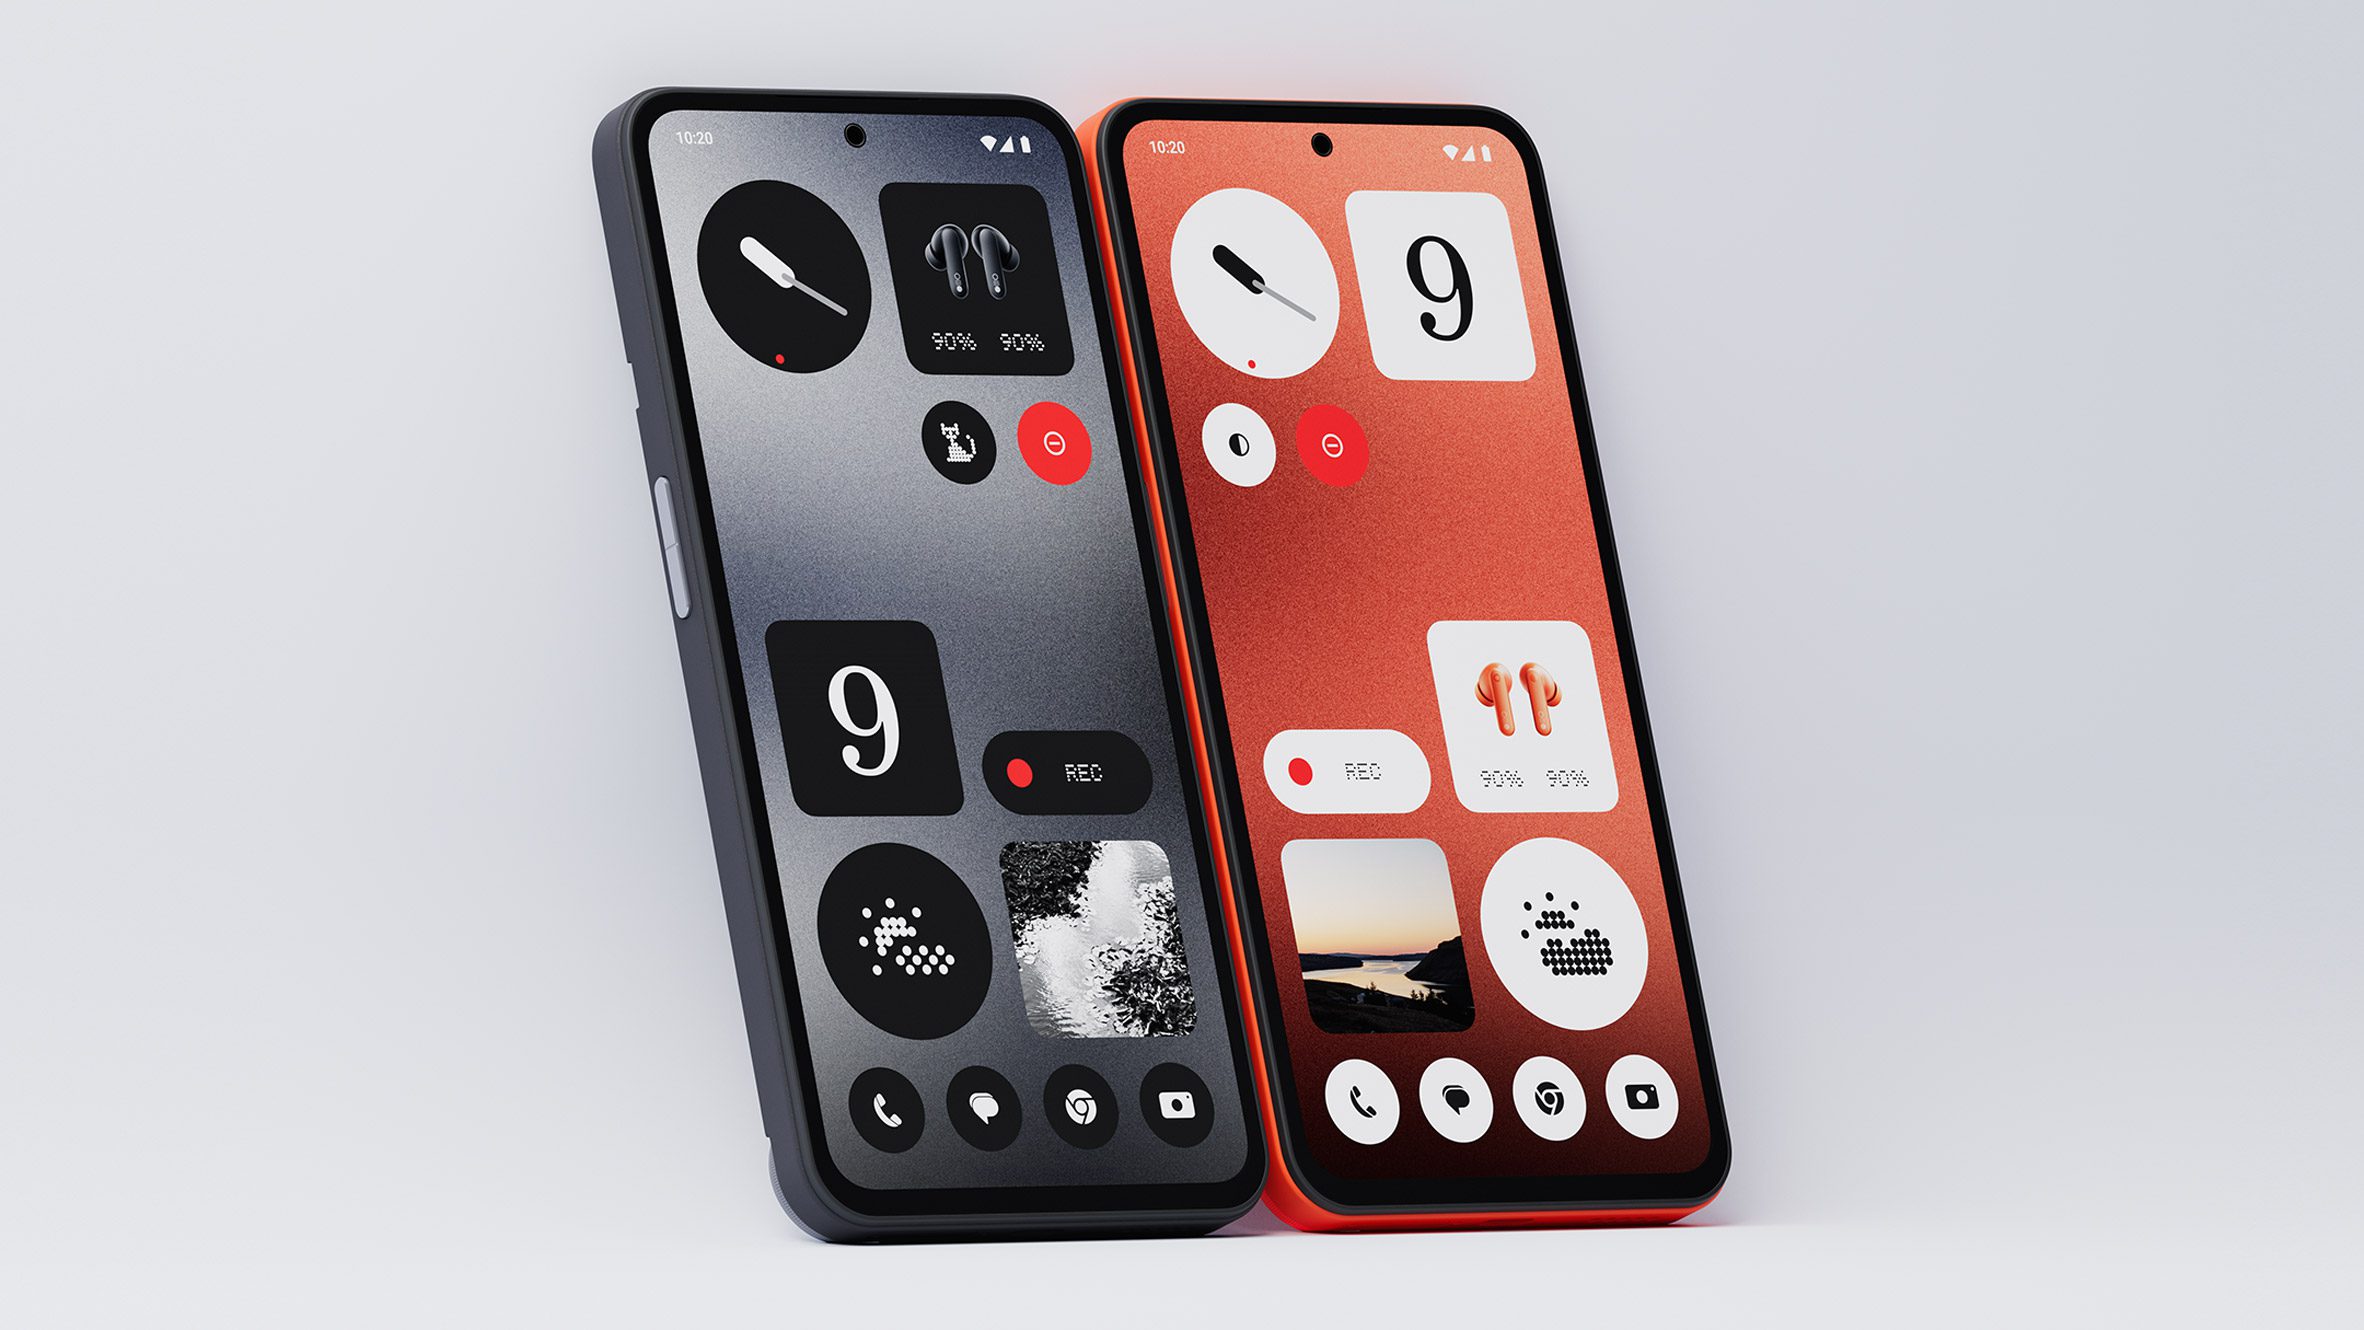 Image of two Nothing CMF Phone 1s, one black one orange, side by side showing their monochromatic operating systems with various widgets on the display